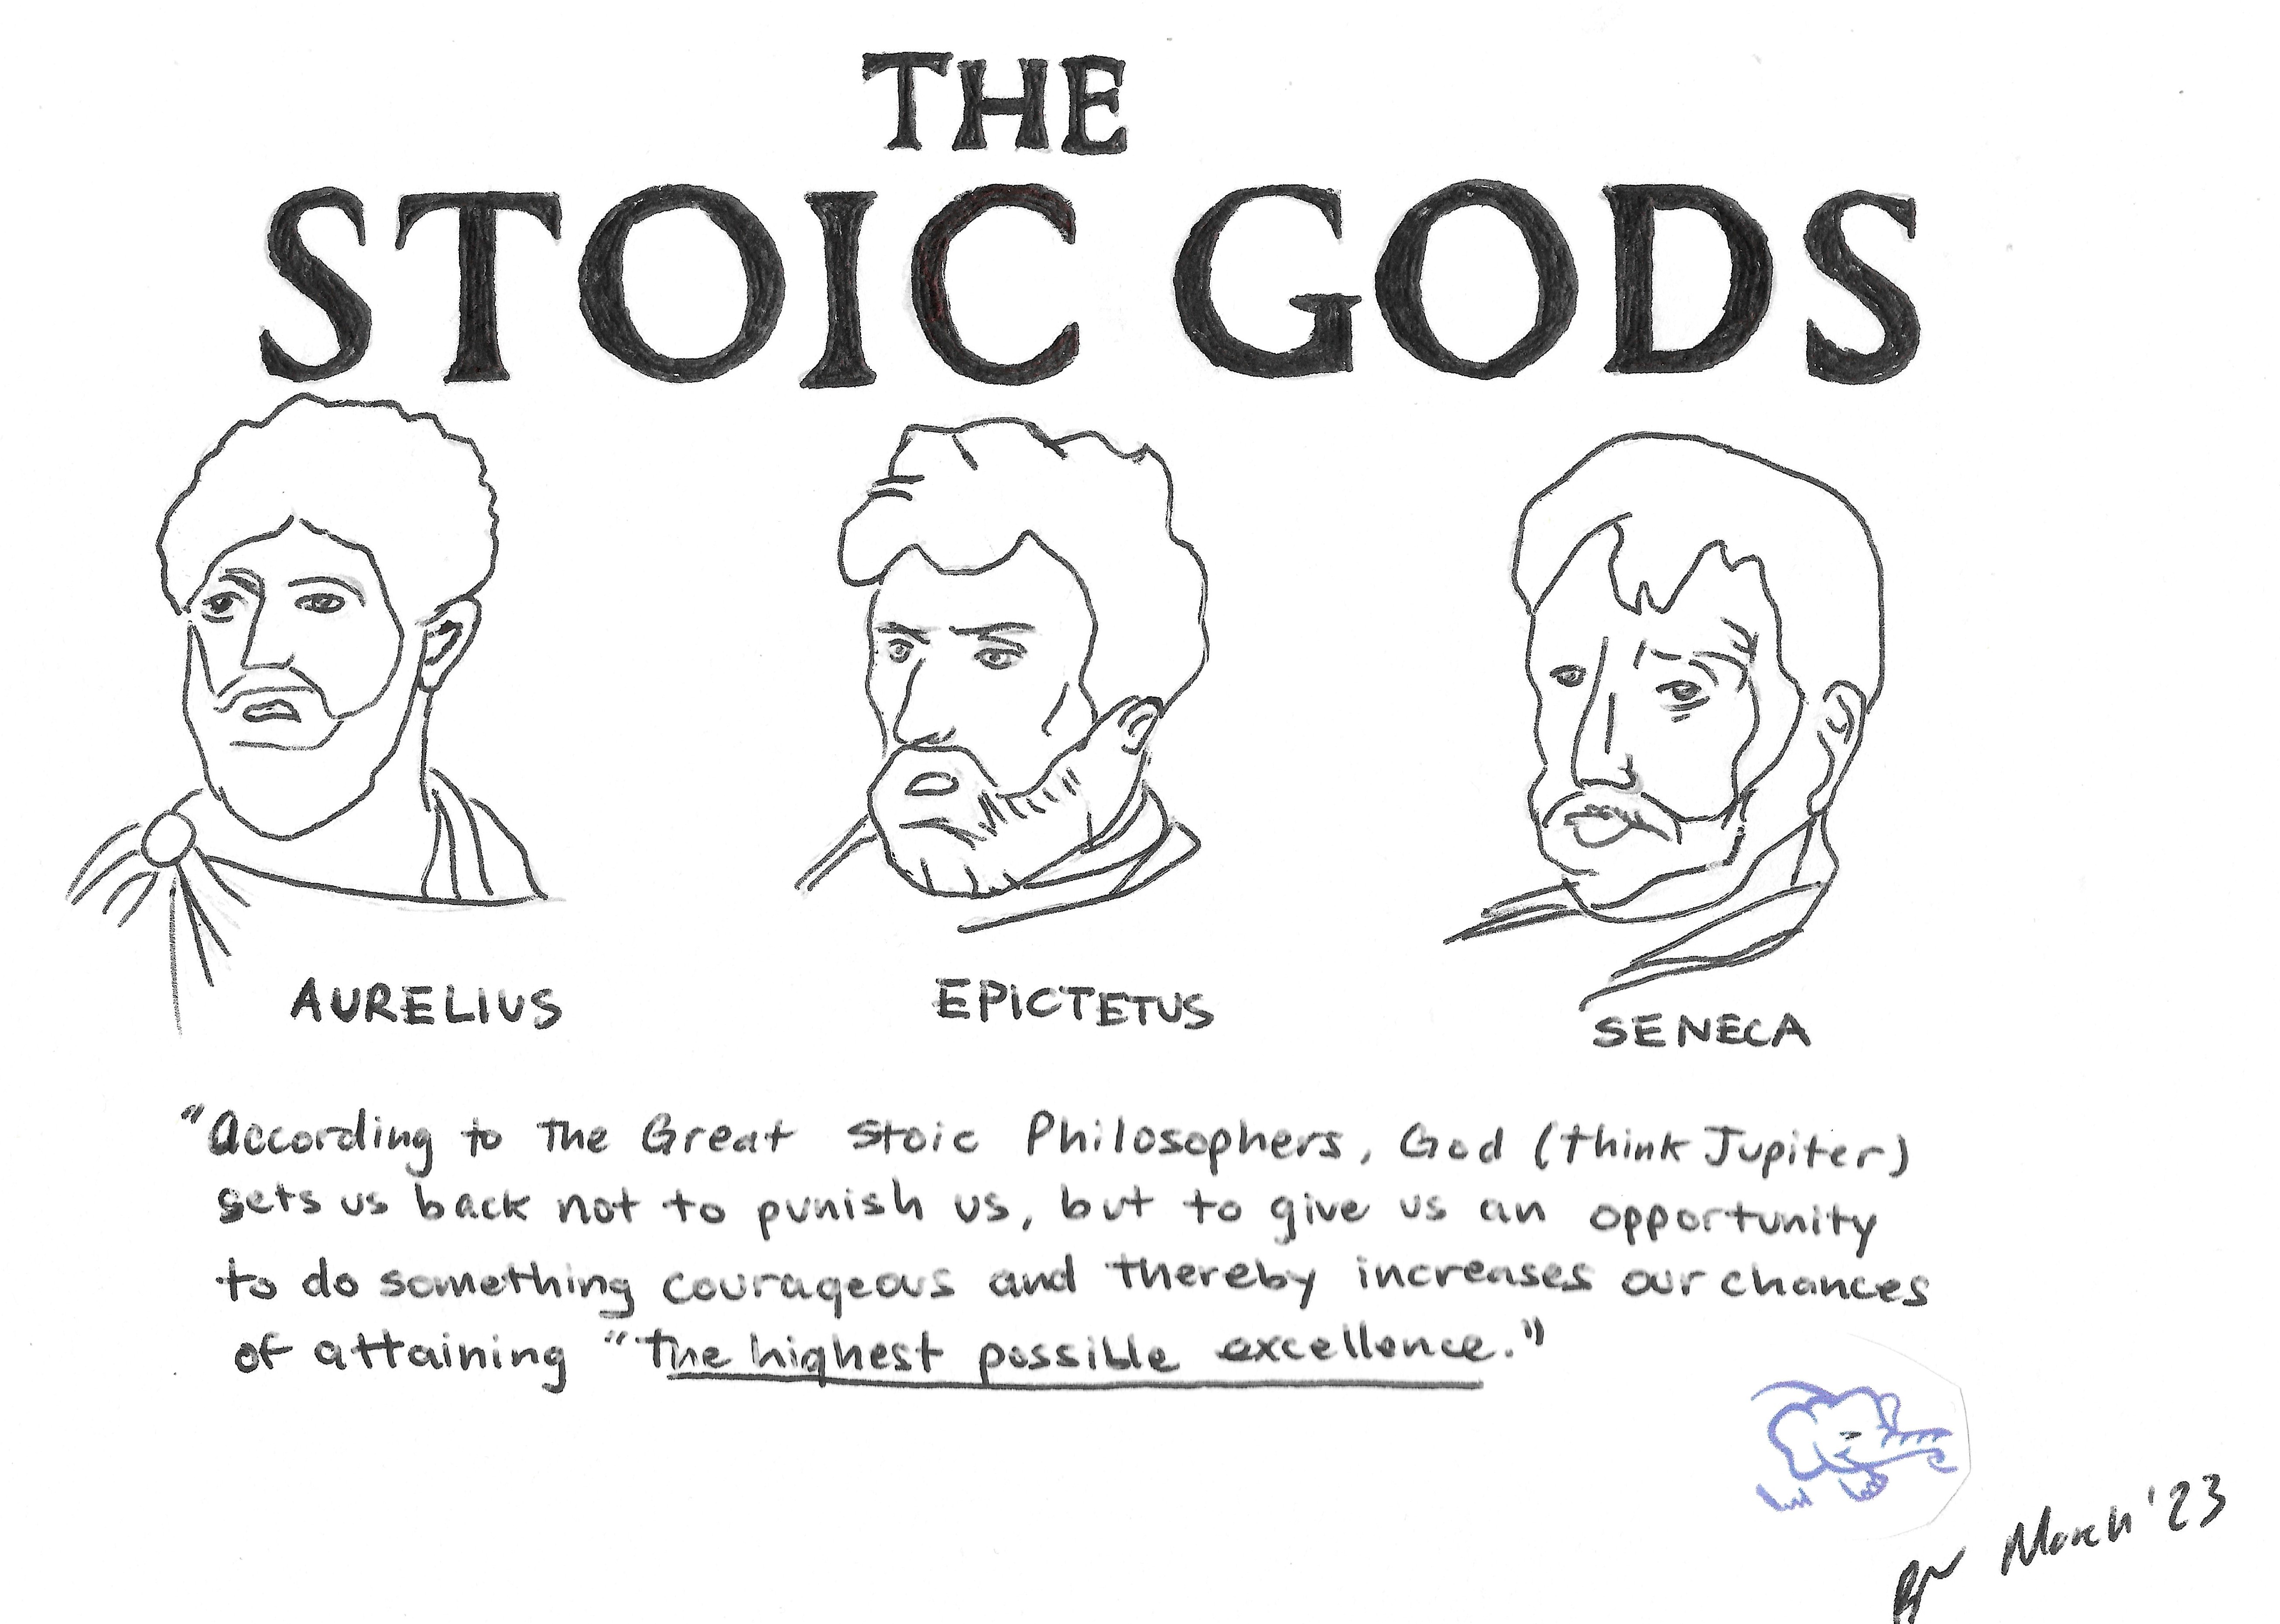 The Great Stoic Philosophers by Brian Nwokedi